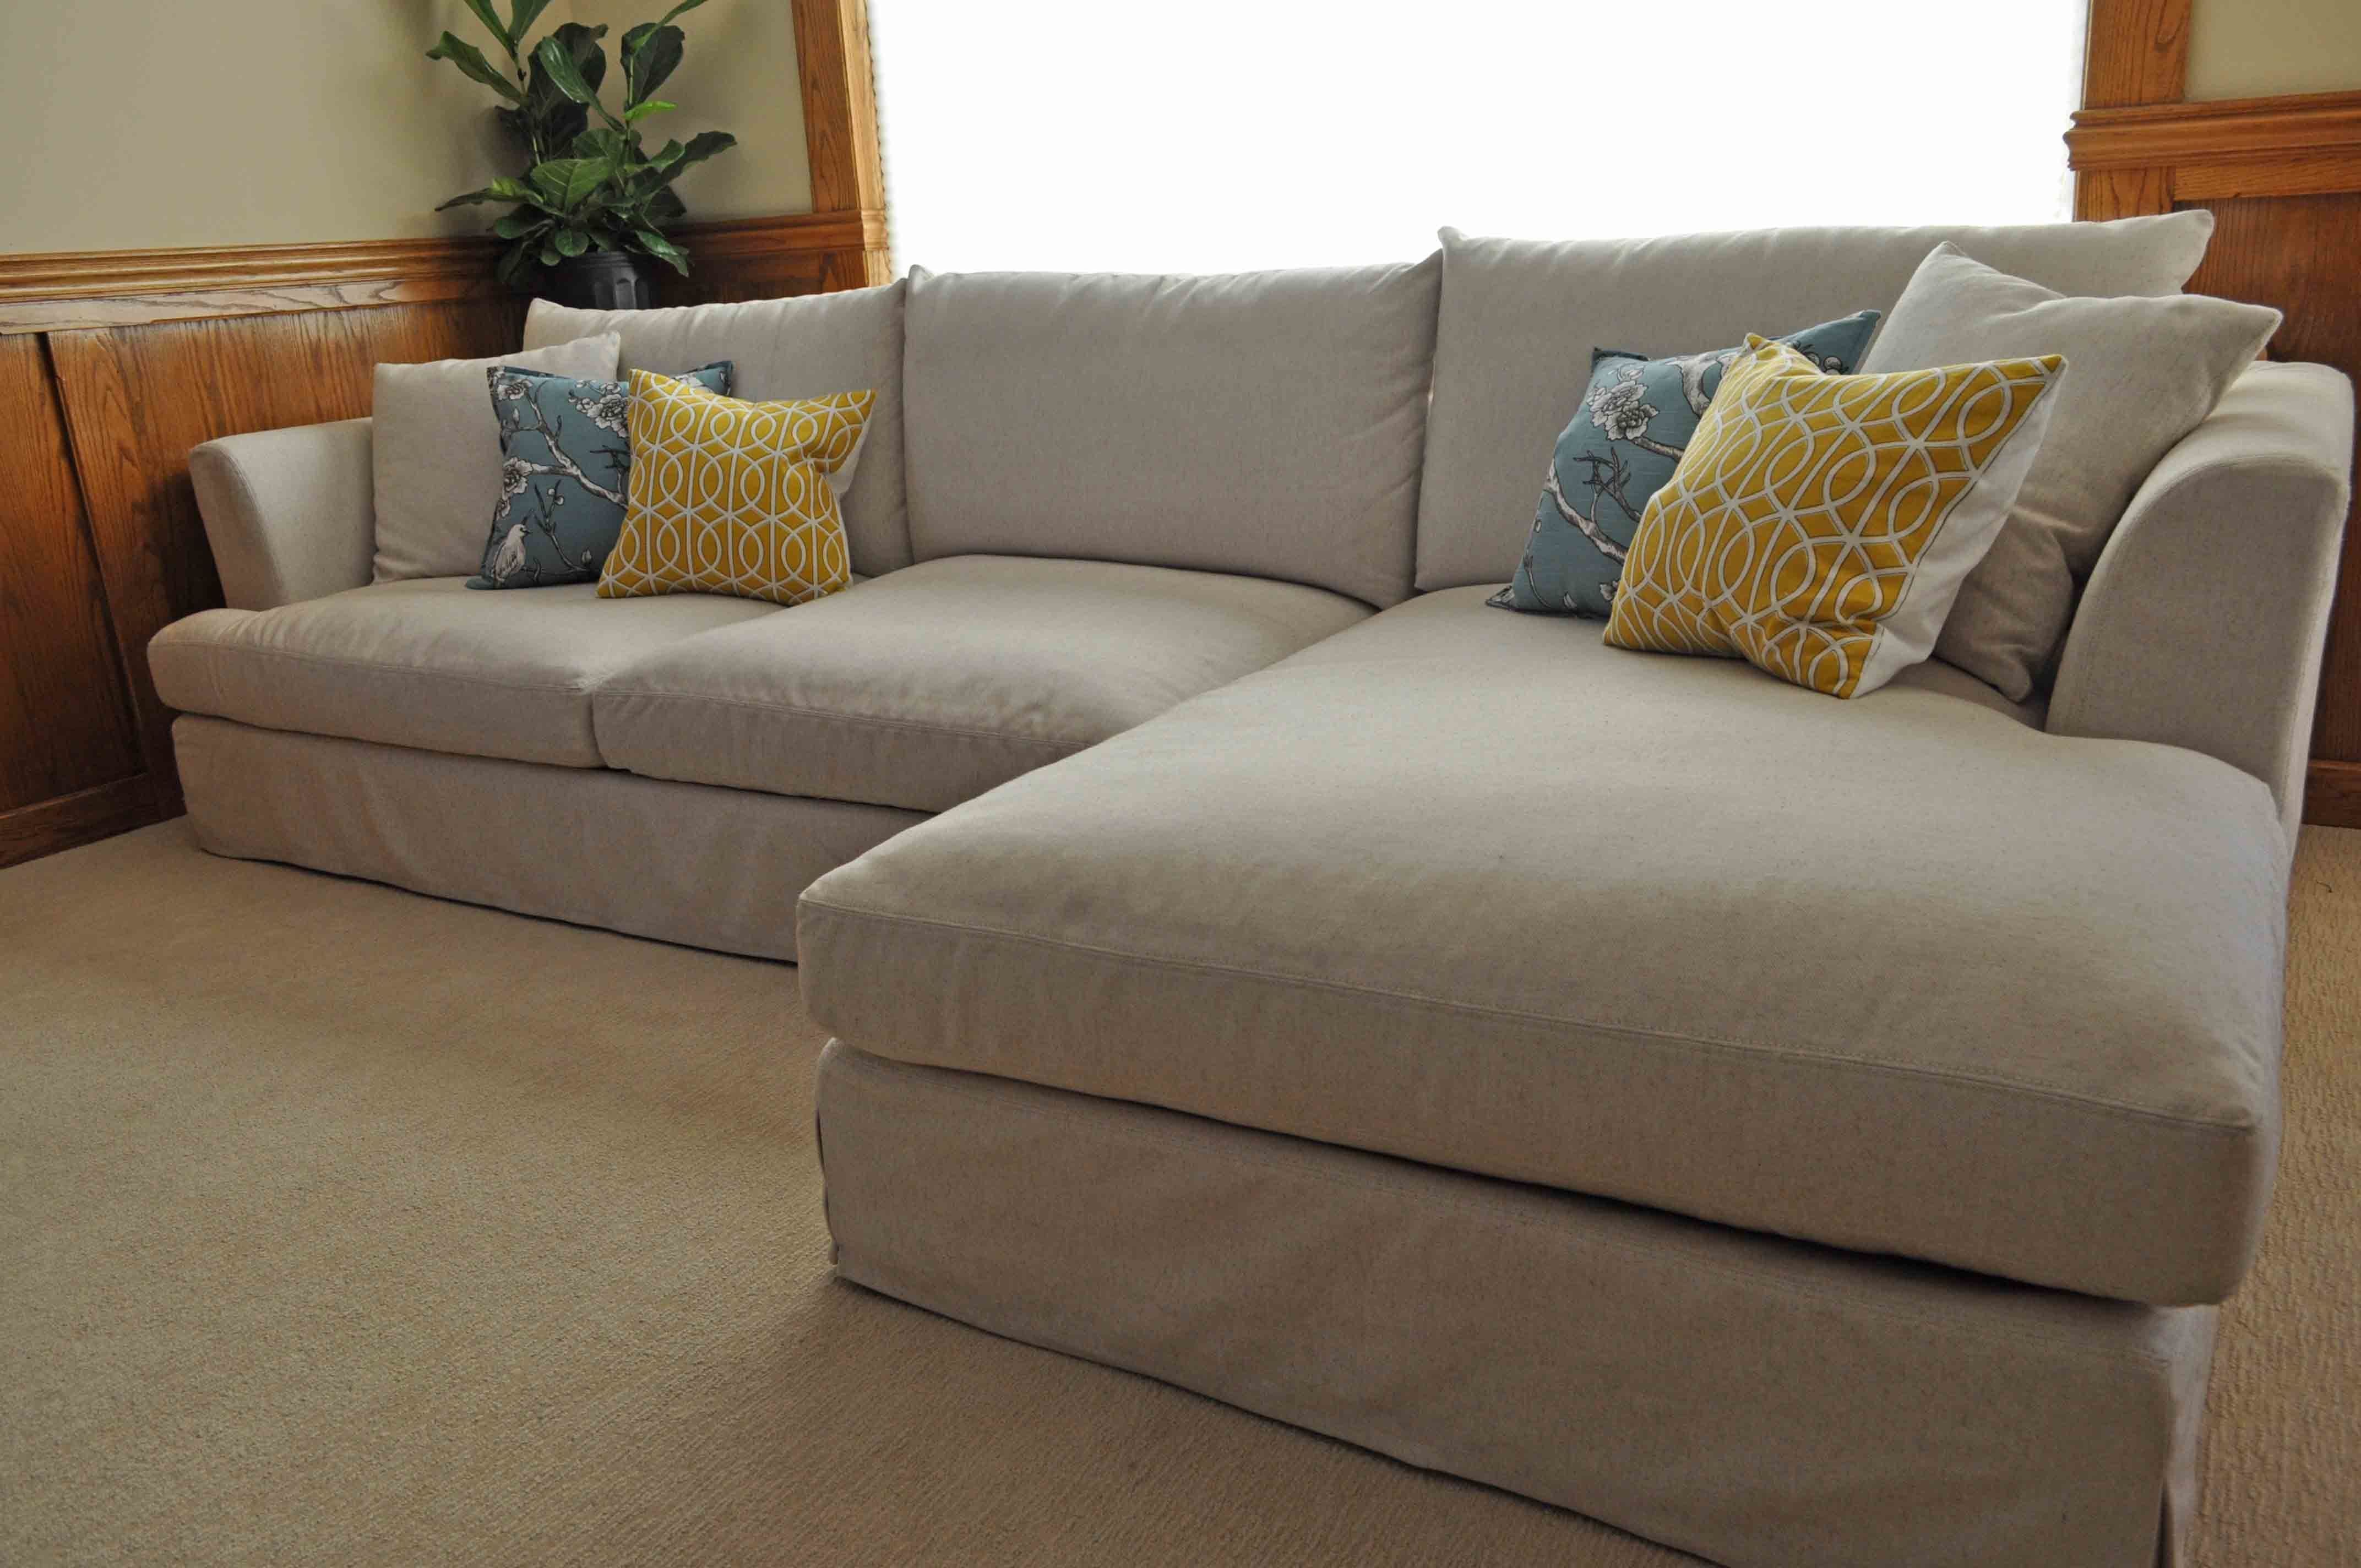 Most Comfortable Sectional Sofa 20 With Most Comfortable Sectional Inside Comfortable Sectional Sofa (View 9 of 12)